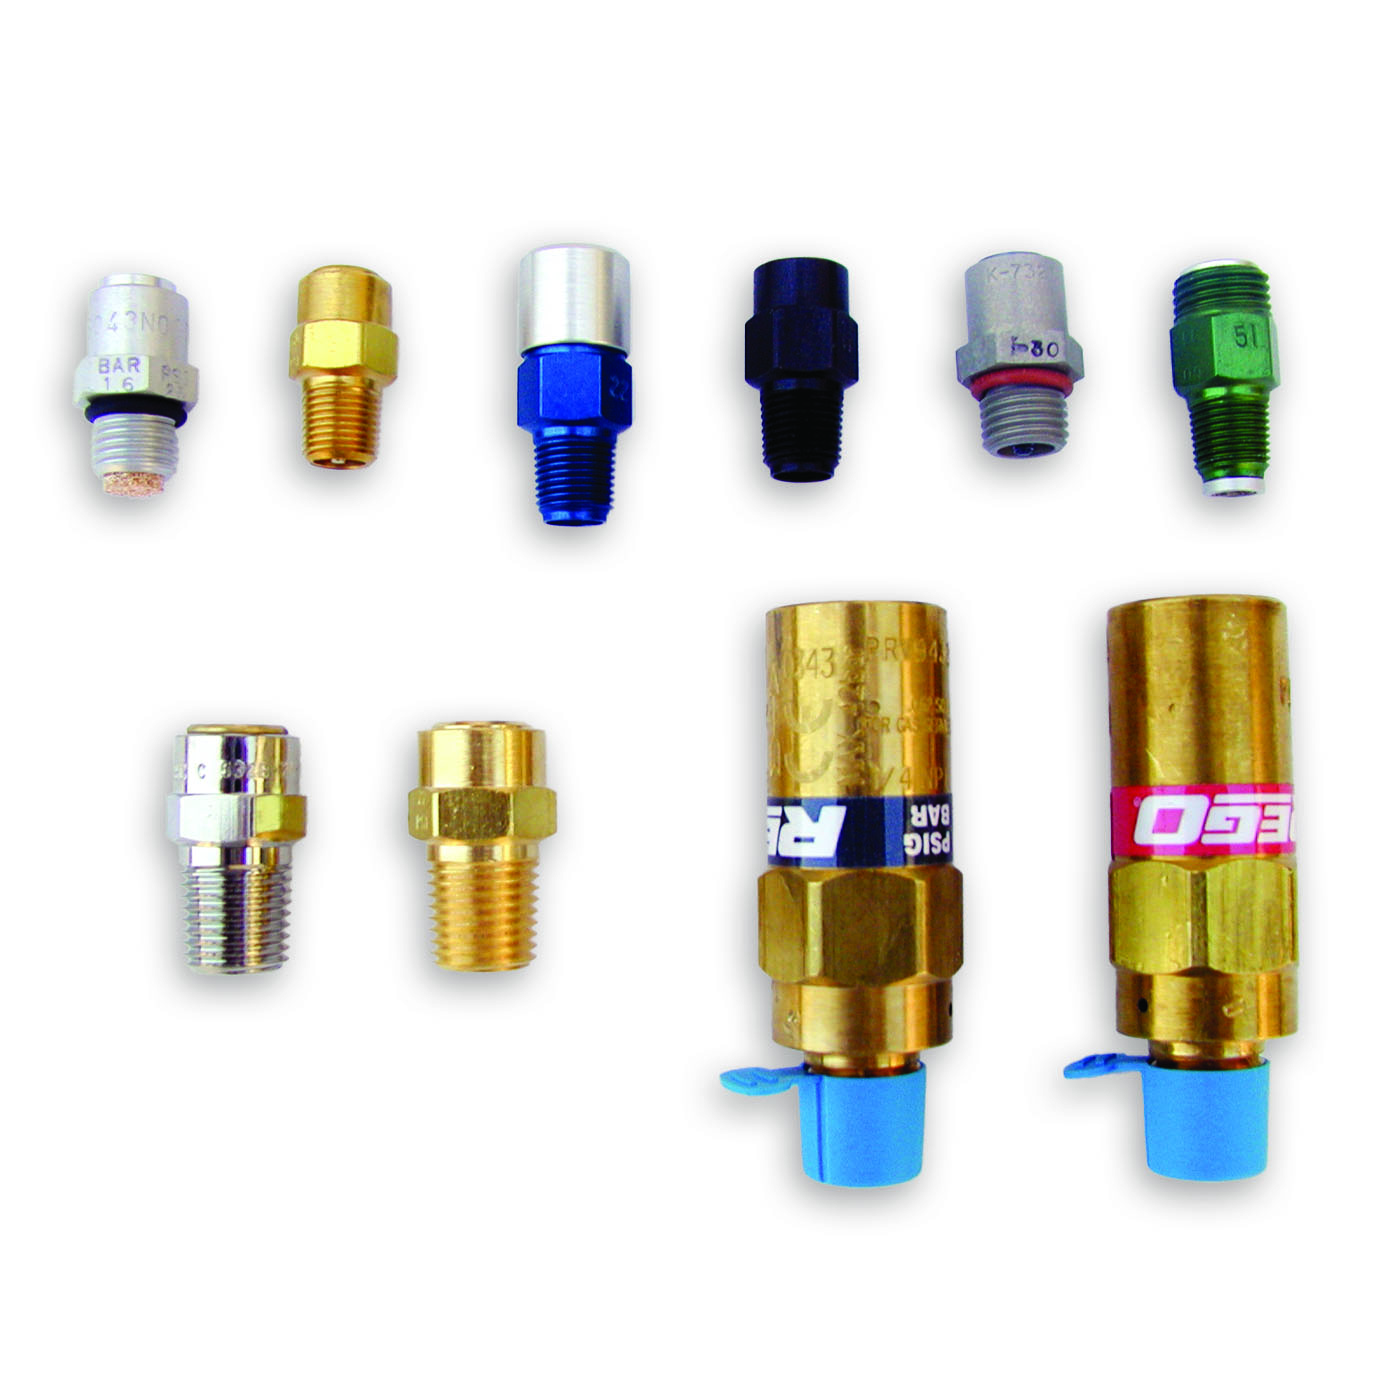 Relief valves for home care liquid oxygen systems